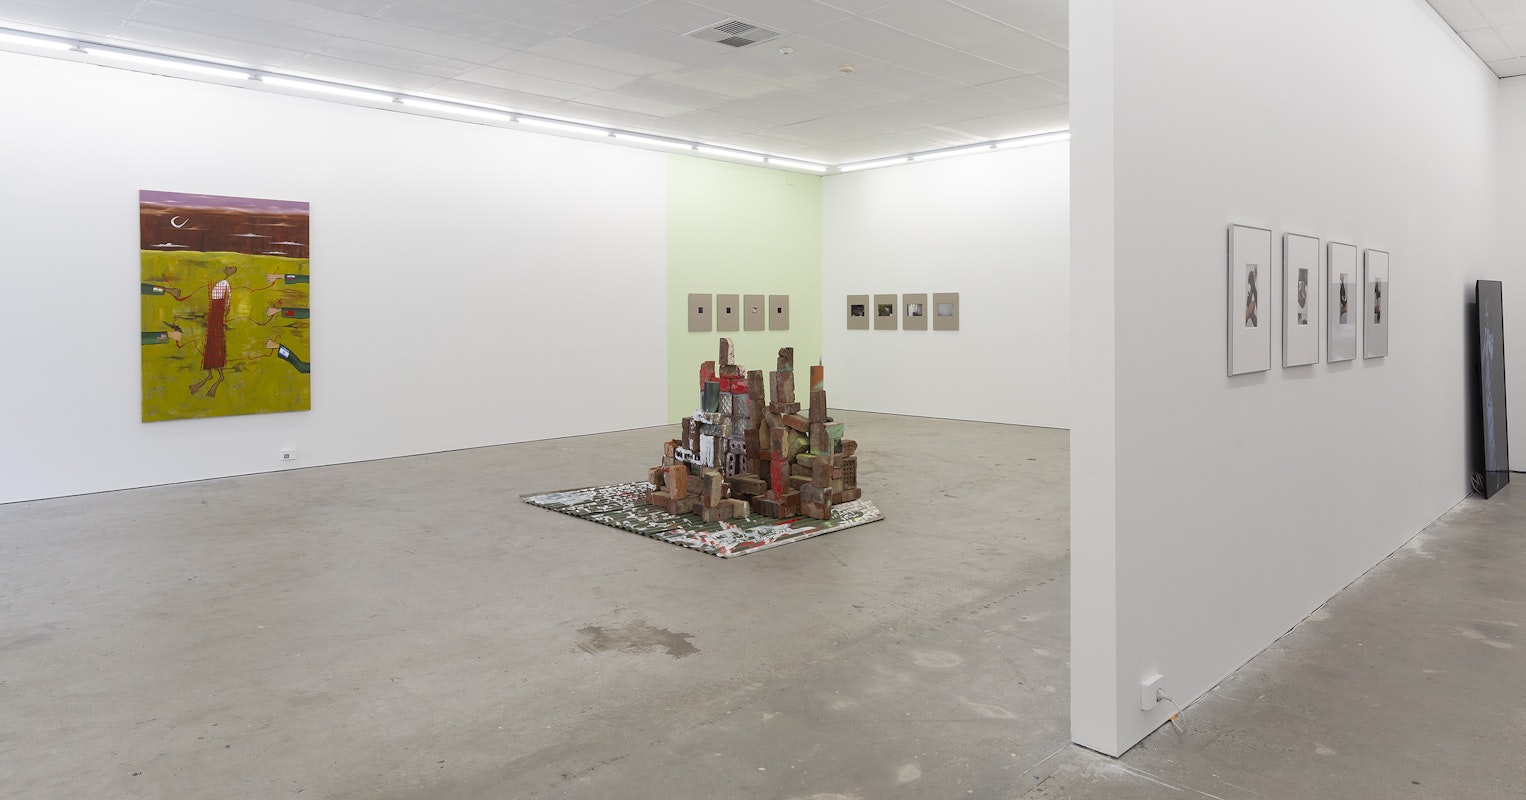 Installation view of Gertrude Studios 2023, featuring works by Mia Boe, Georgia Morgan, Ruth Hoflich, Arini Byng and Scotty So. Photo: Christian Capurro